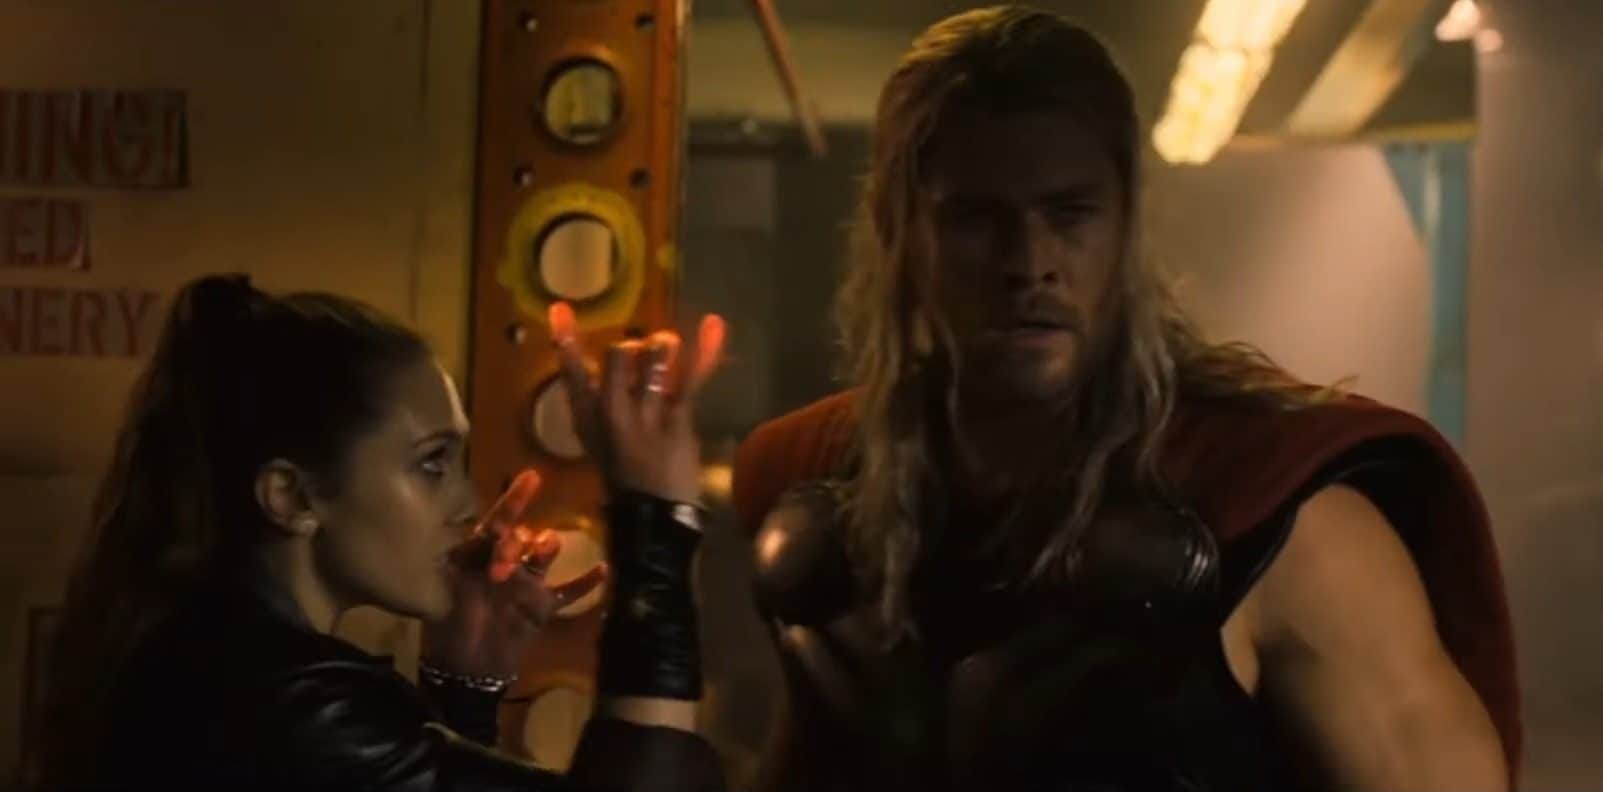 Wanda trying to mind control Thor